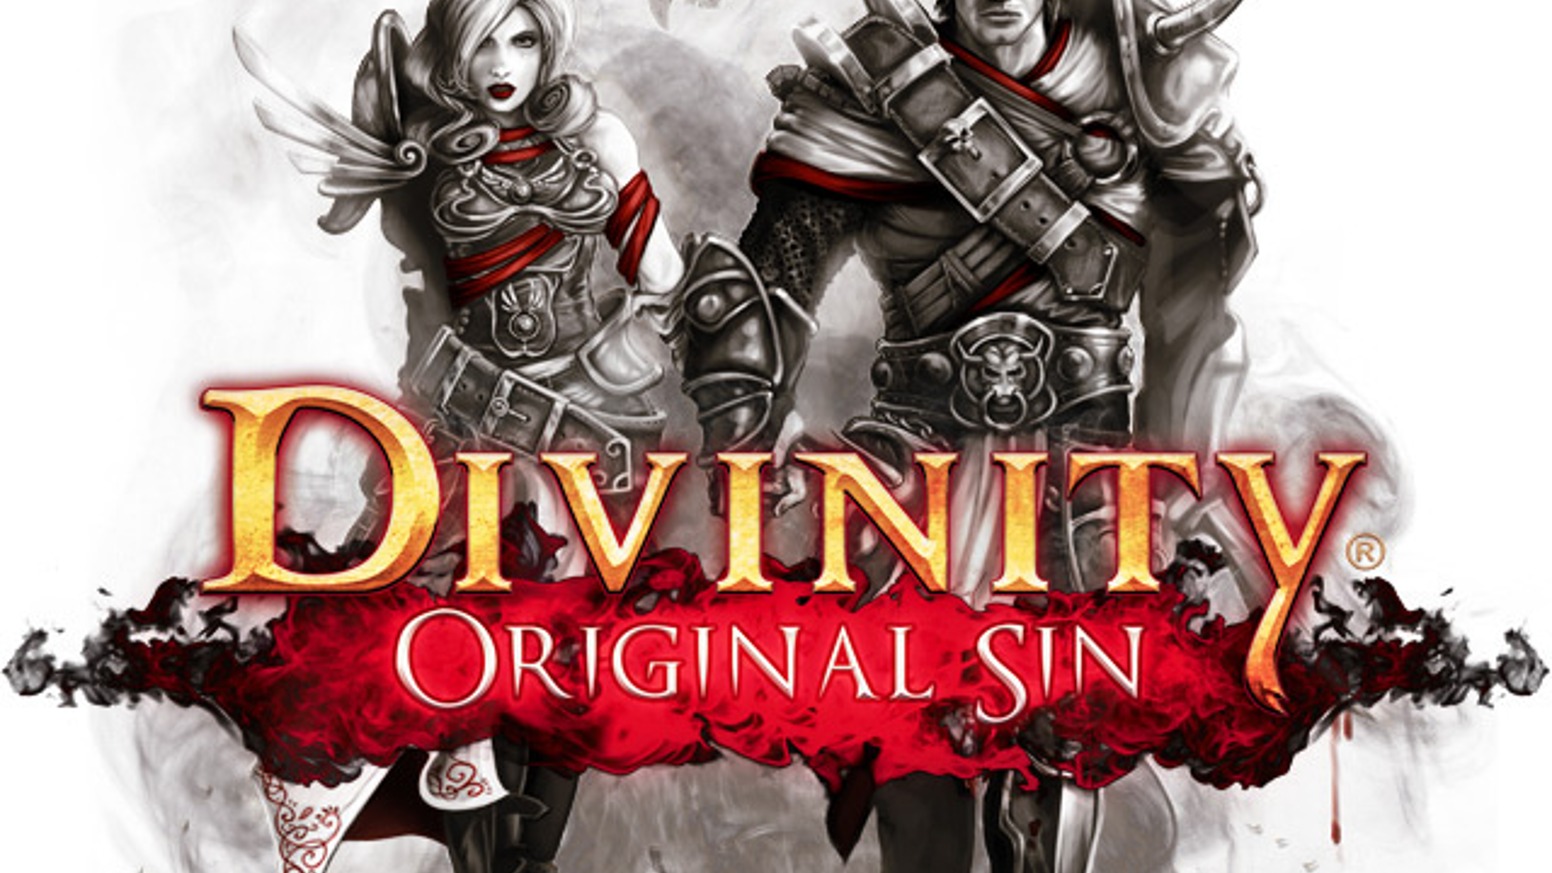 Divinity Original Sin is an old-school cRPG with new ideas & modern execution, will release this year. Funded by fantastic backers!